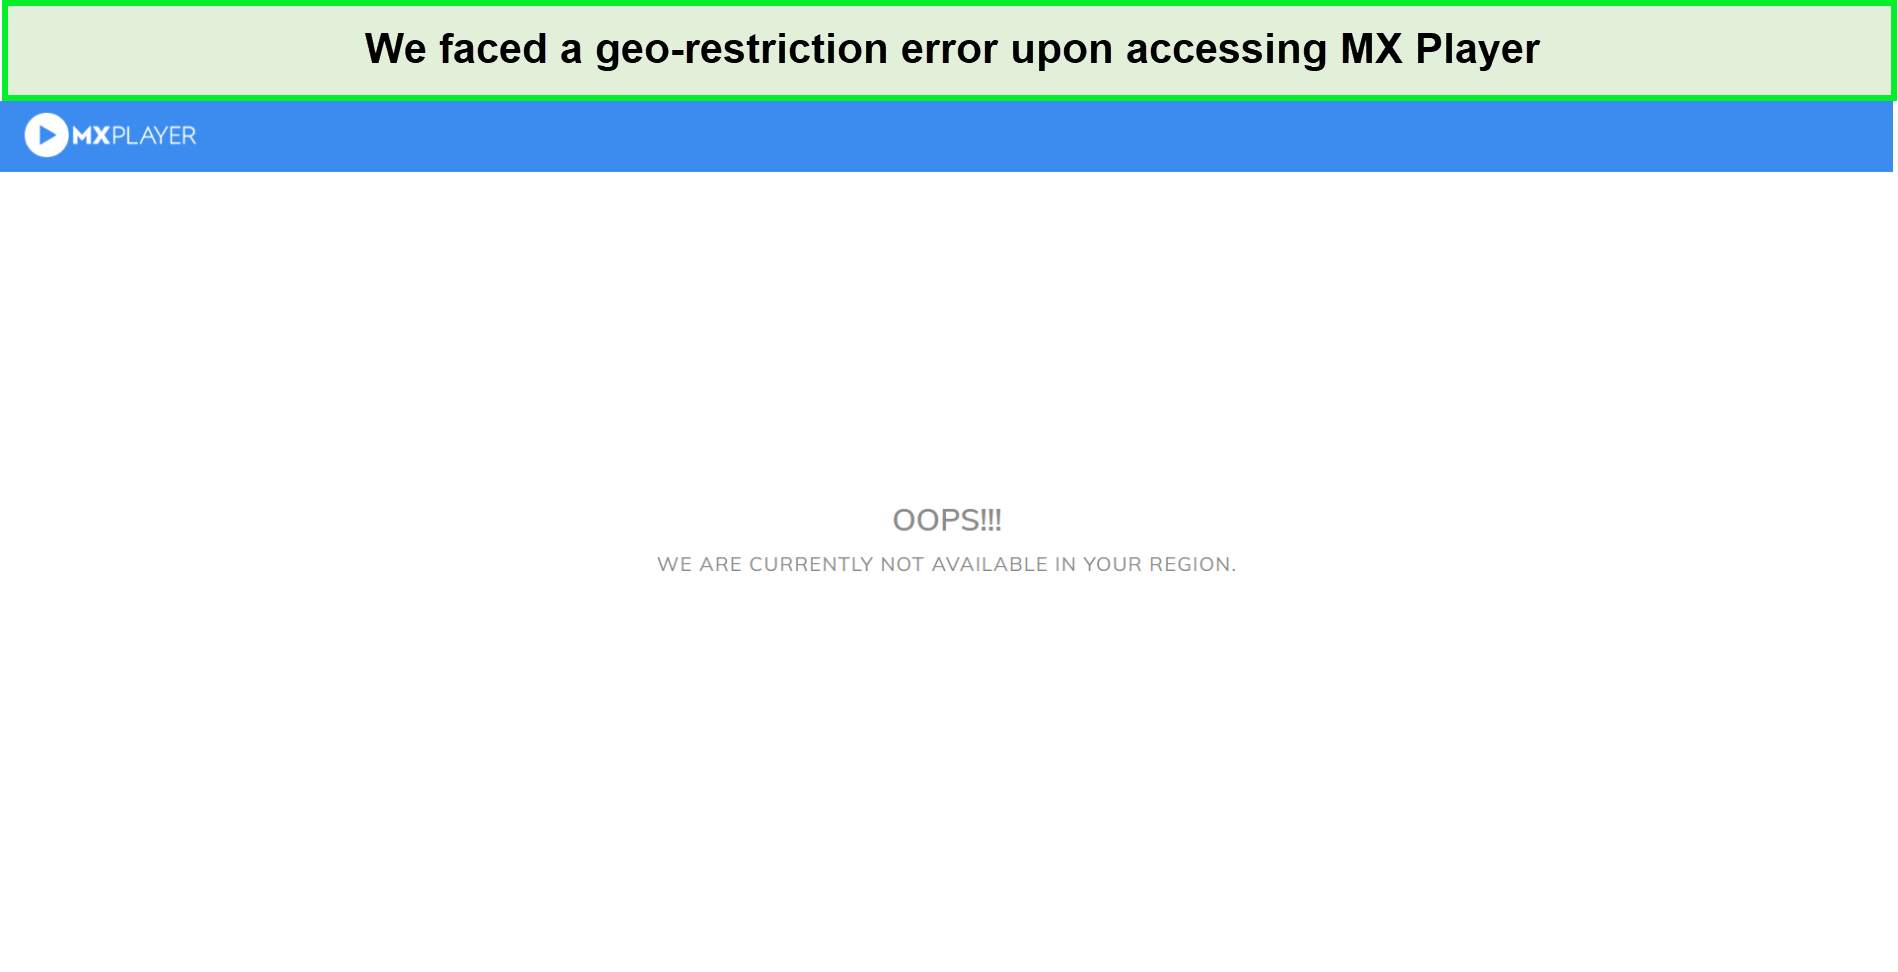 mx-player-in-Hong Kong-geo-restriction-error